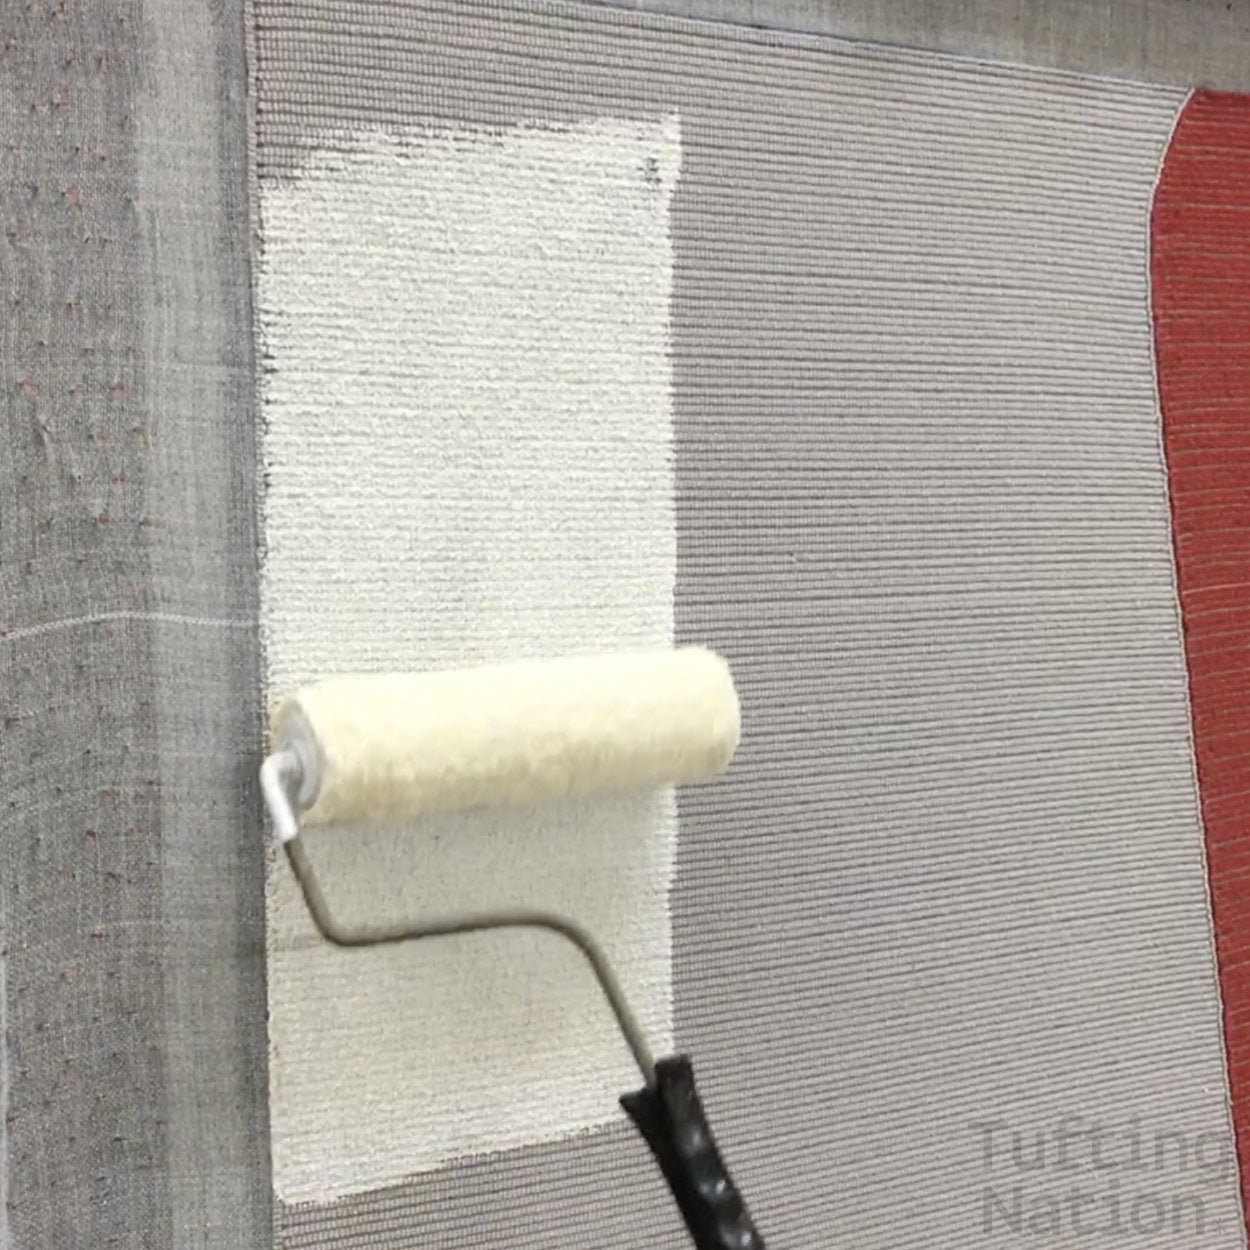 Backing GLUE for RUG TUFTING Review